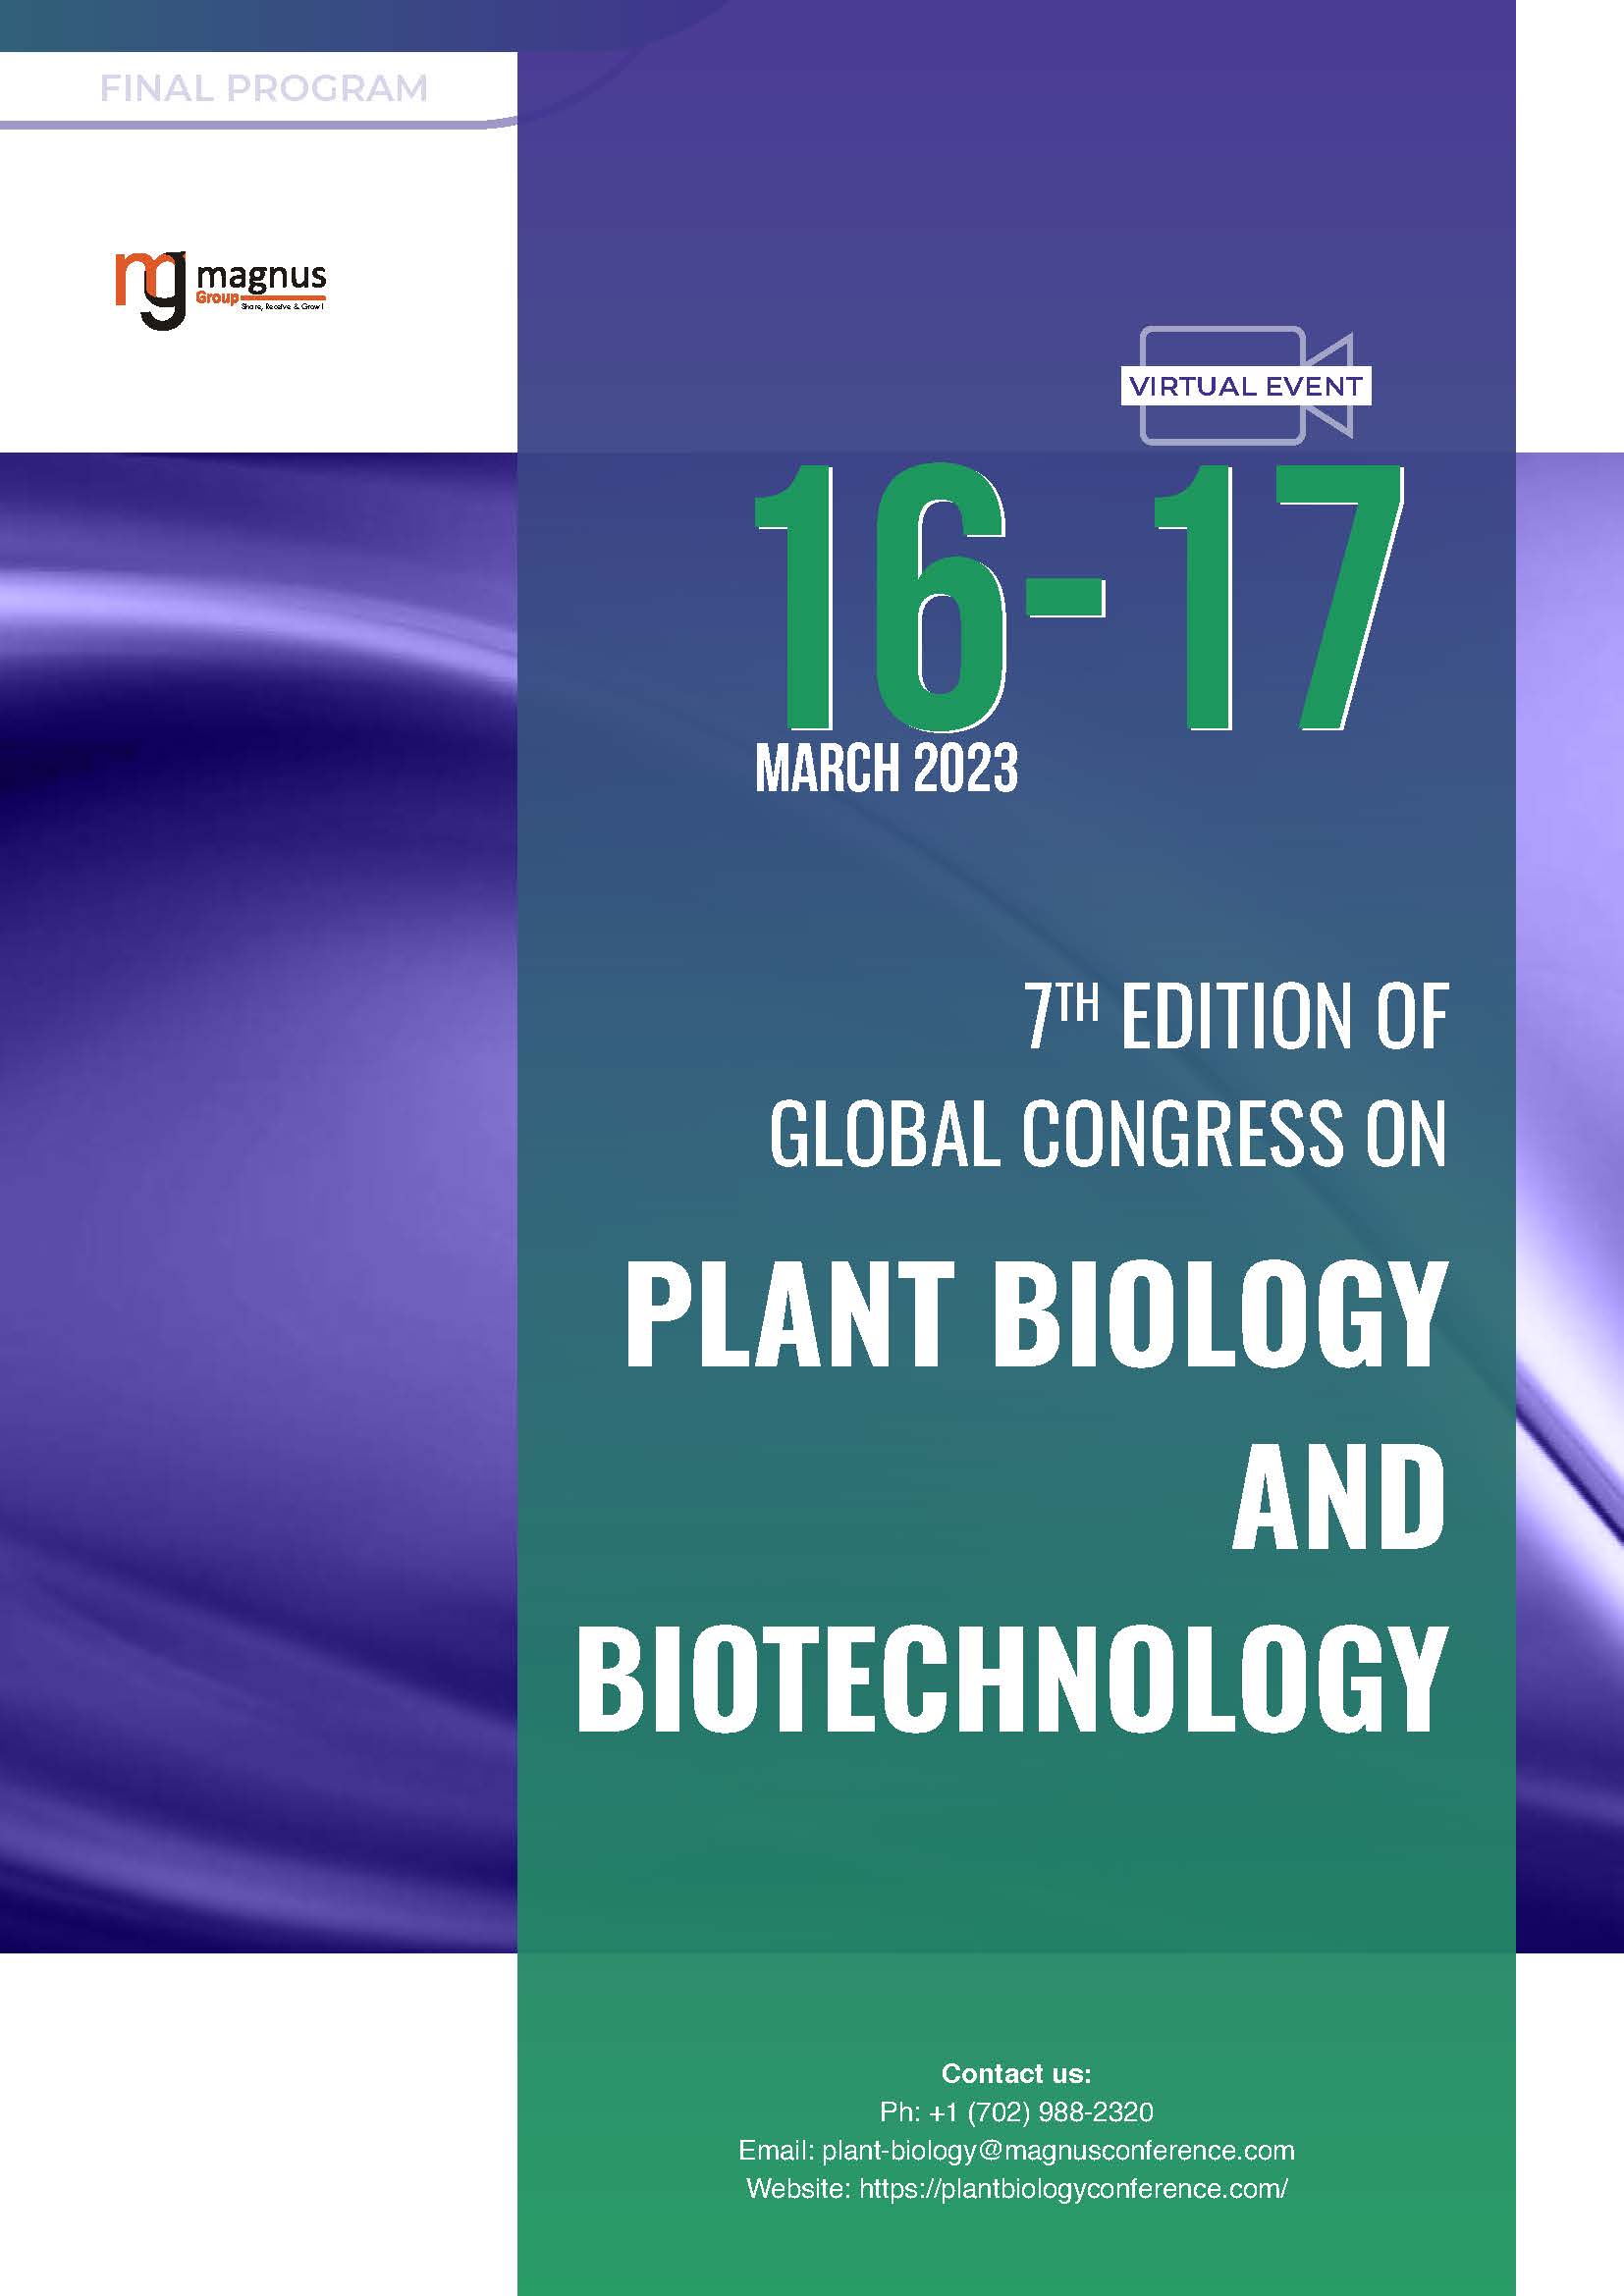 7th Edition of Global Congress on Plant Biology and Biotechnology | Online Event Program